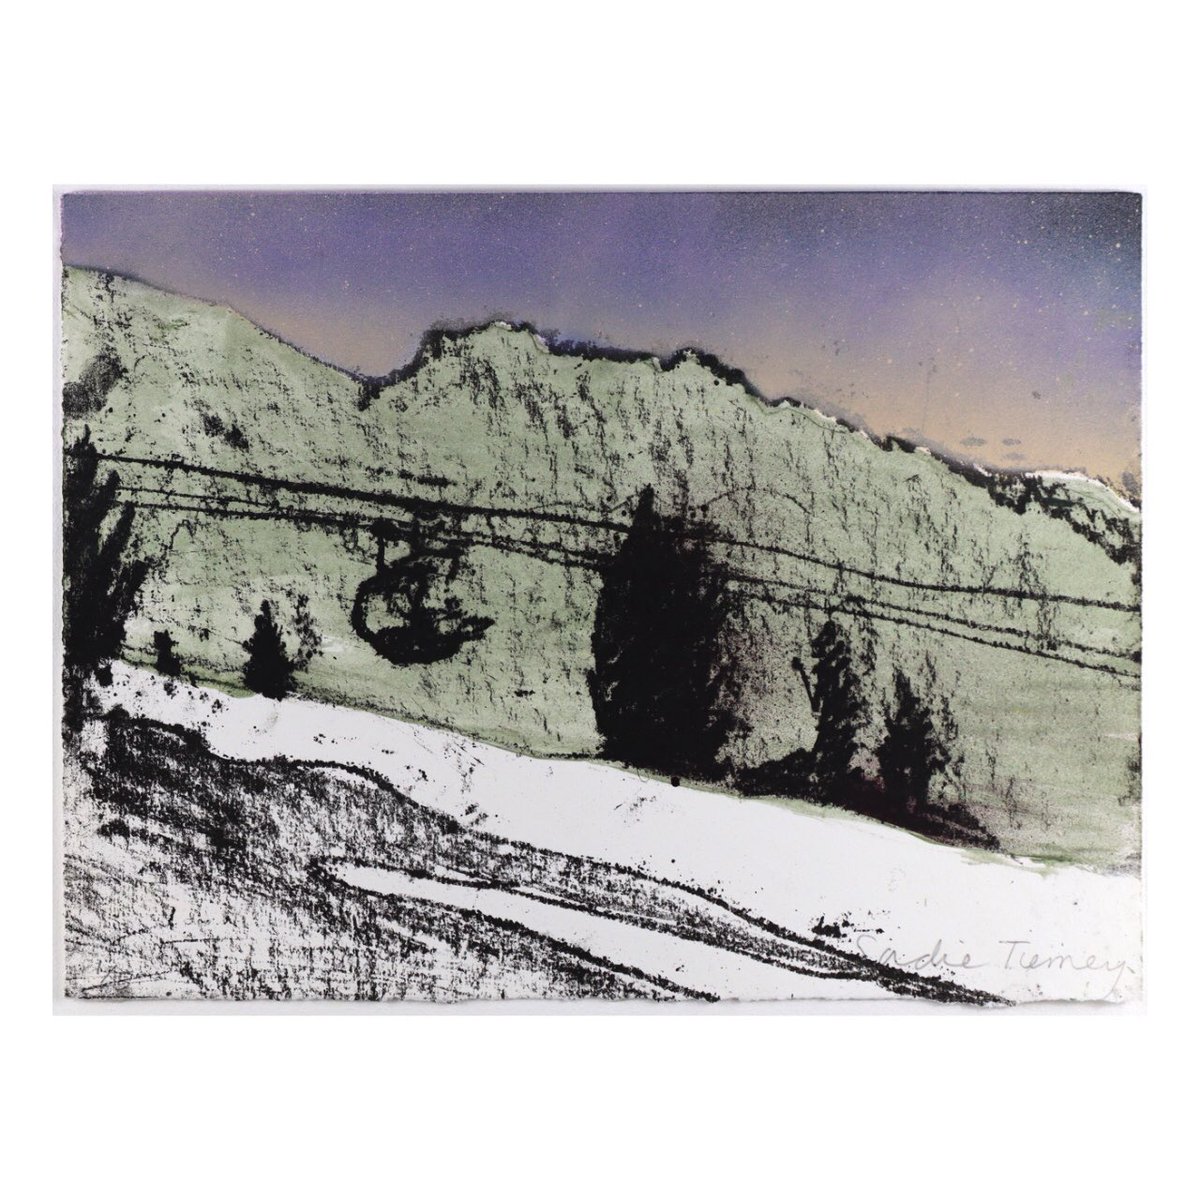 Lift: Dusk, hand finished lithograph, 27x35cm. Edition of 5. Part of a box available as a set or individually. One of 41 new works in my Solo Exhibition “The Mountains are Calling” @RableyGallery until Saturday 18 December